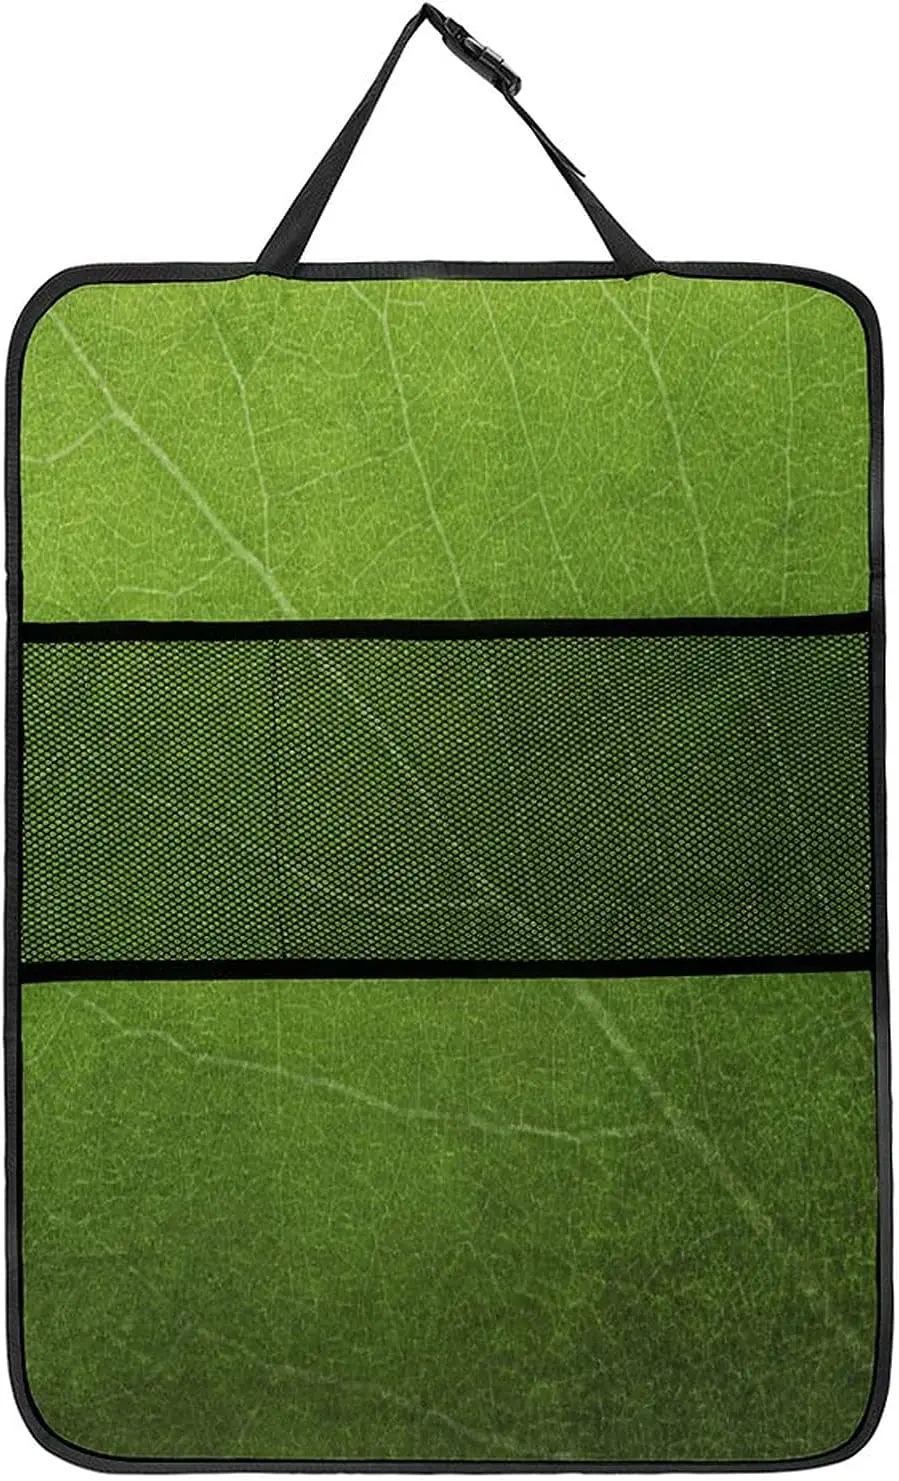 

Abstract Green Leaf Texture in The Background Anti-Kick Pads for car Seats,Anti-Scratch,Anti-Dirty,Suitable for Most Cars,Trucks